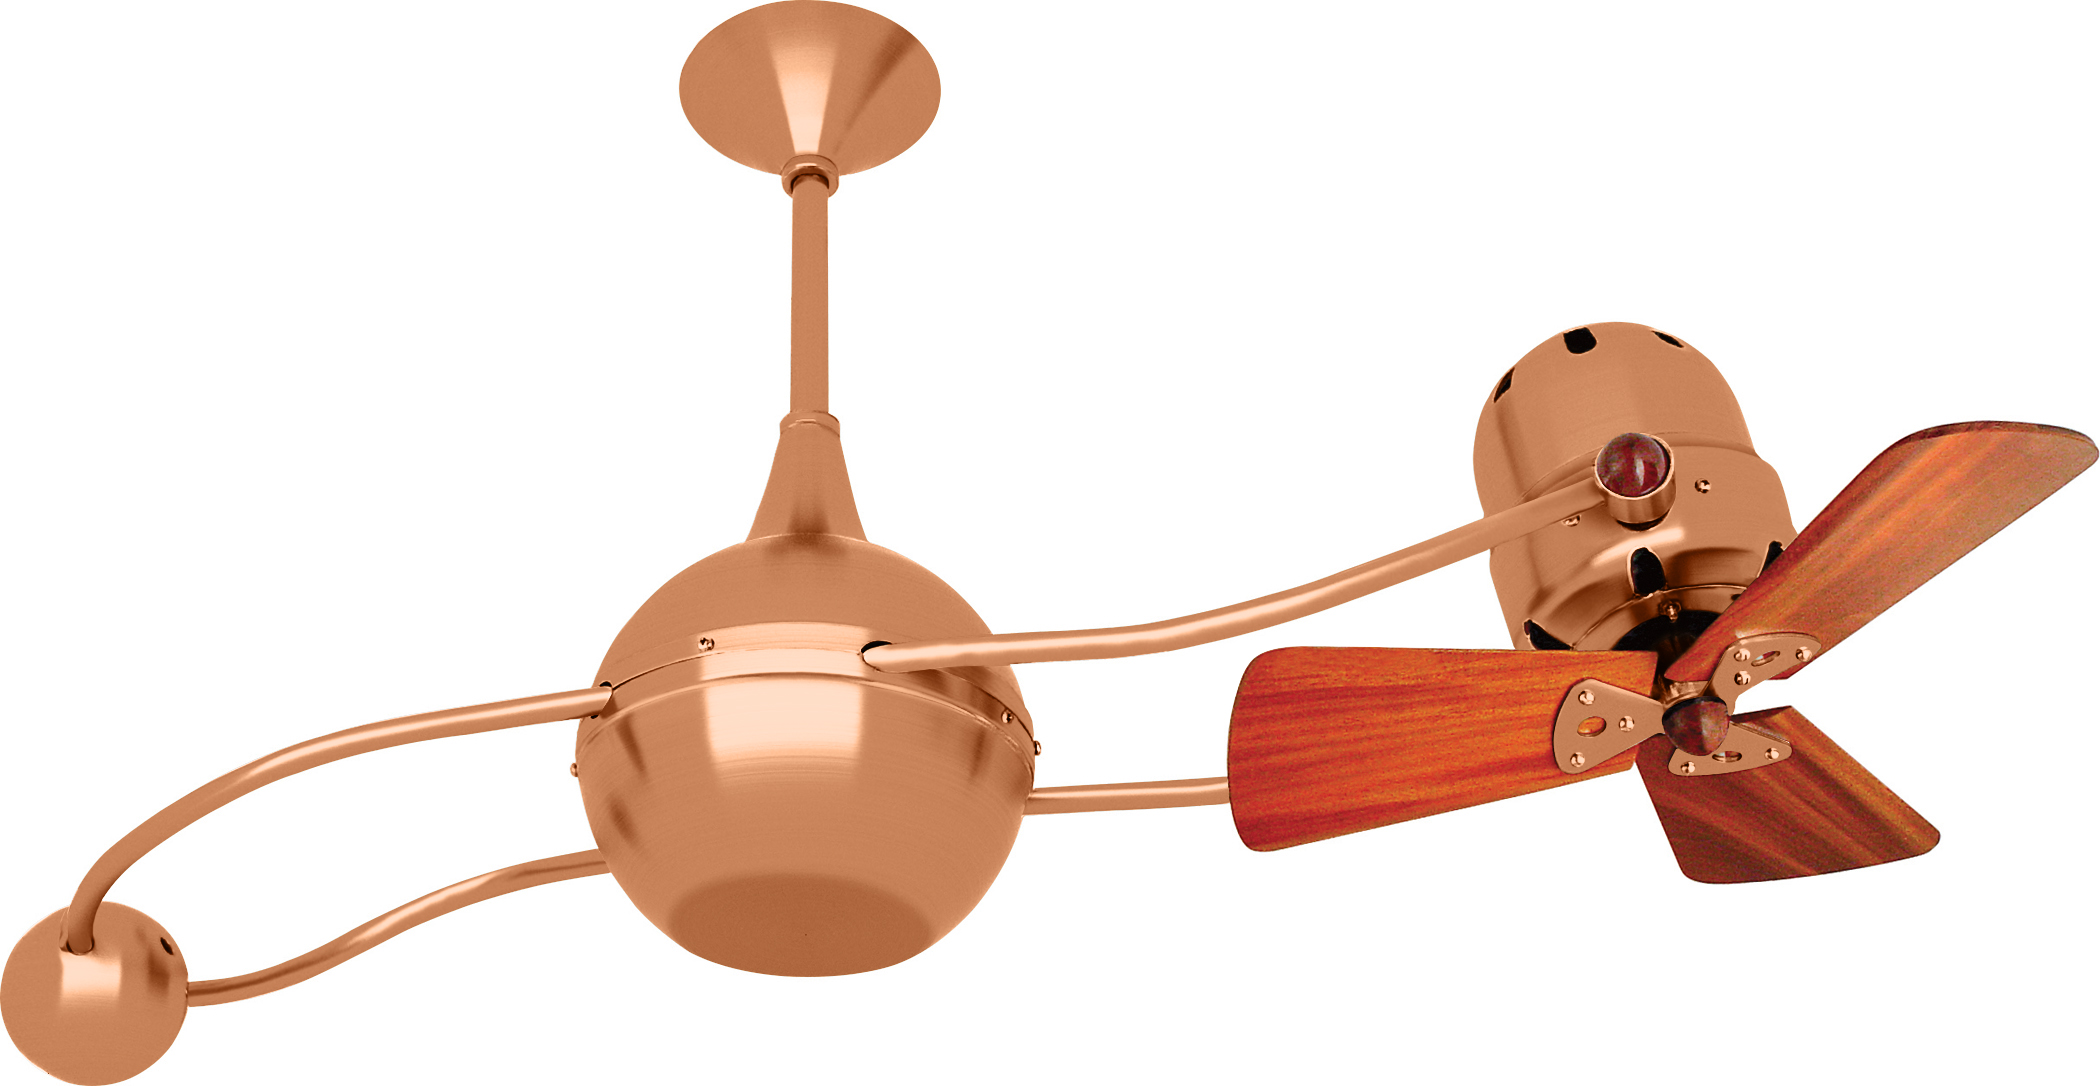 Brisa 2000 ceiling fan in Brushed Copper finish with Mahogany Wood Blades made by Matthews Fan Company.